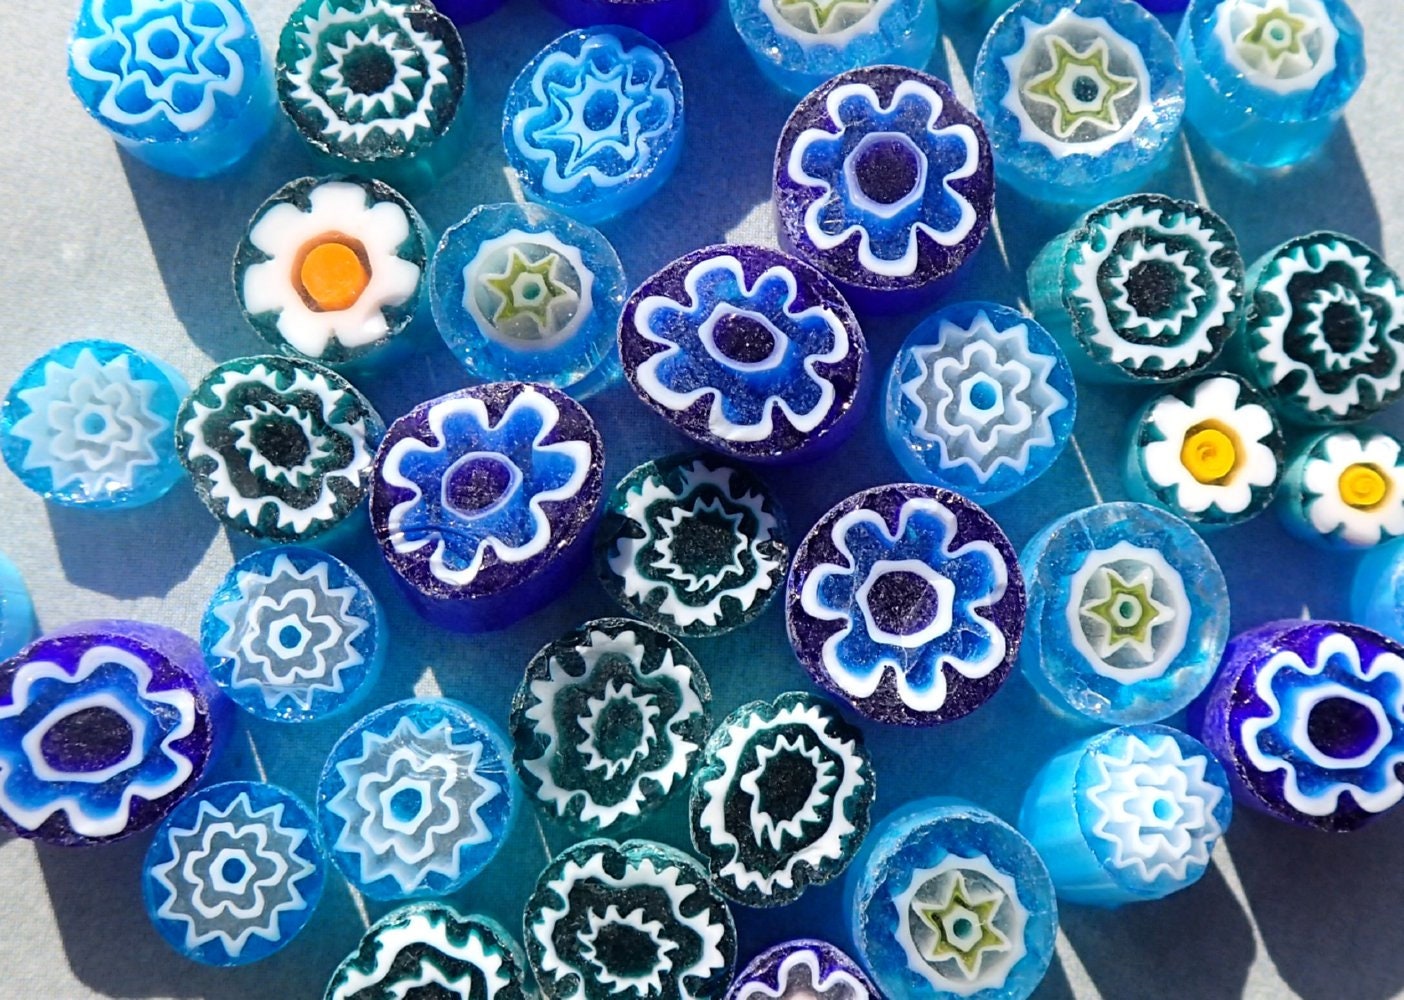 By the Sea Blue Millefiori - 25 grams - Unique Mosaic Glass Tiles - Mix of Different Floral Patterns